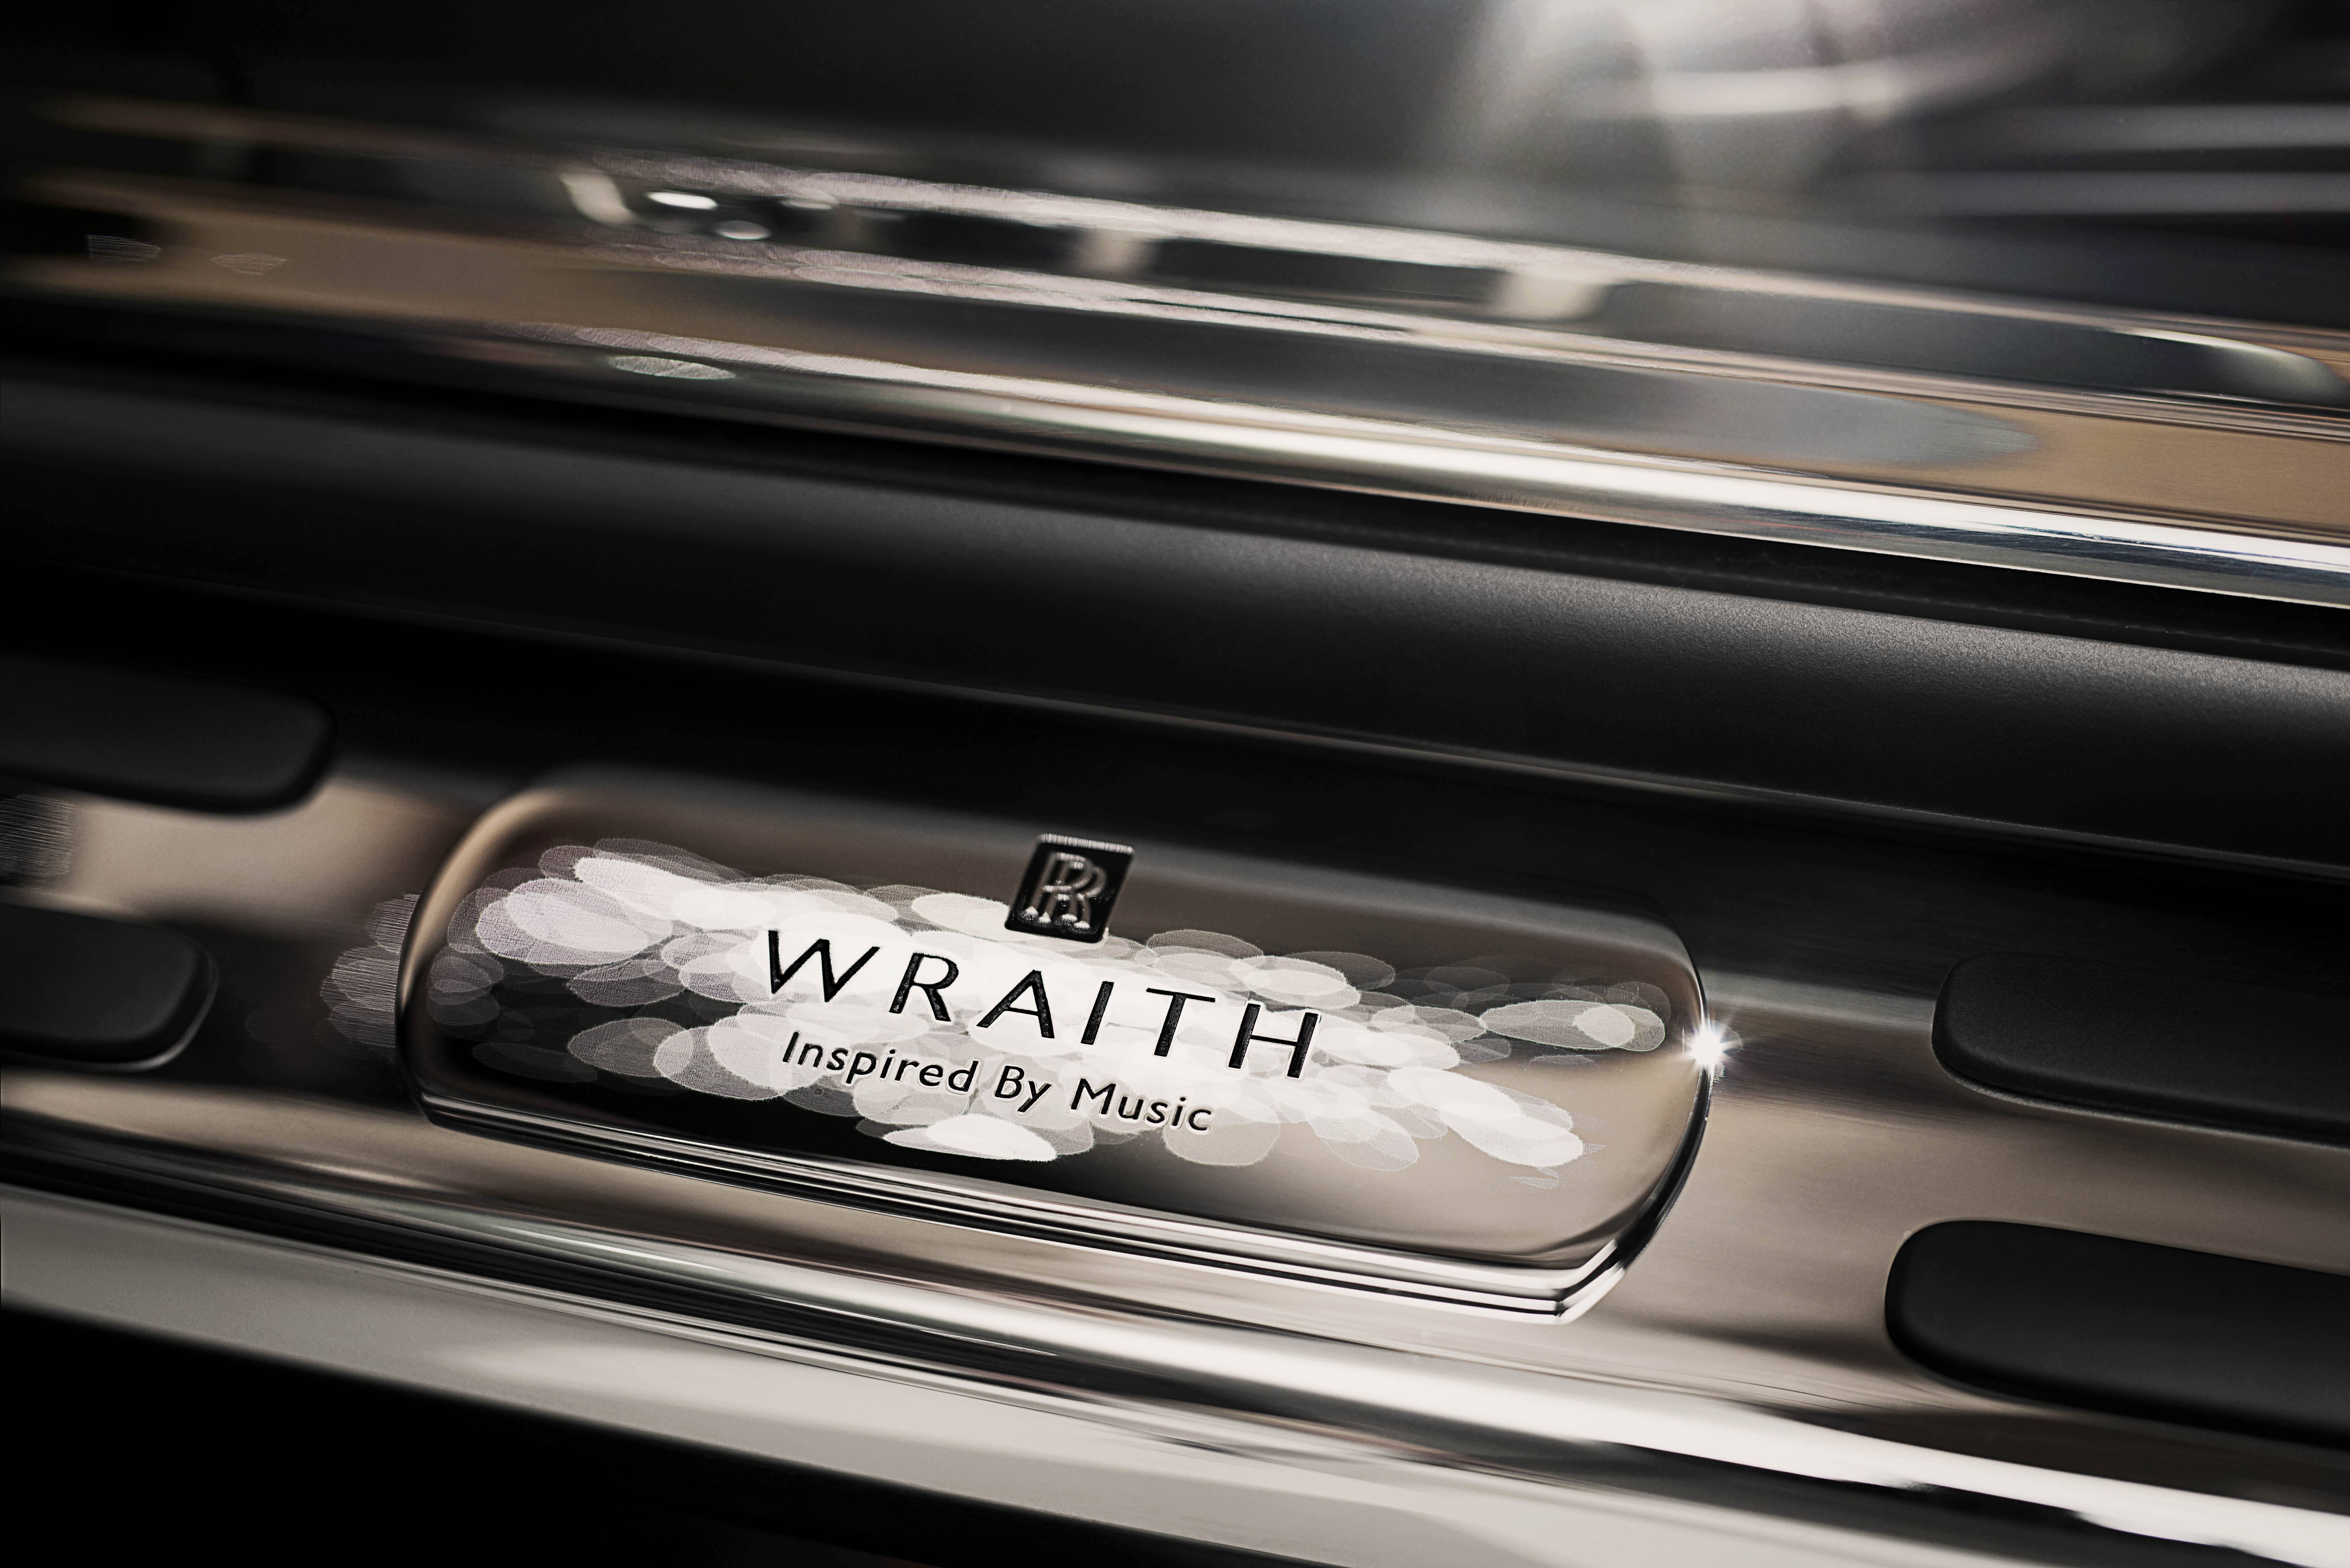 Wraith “Inspired by Music”